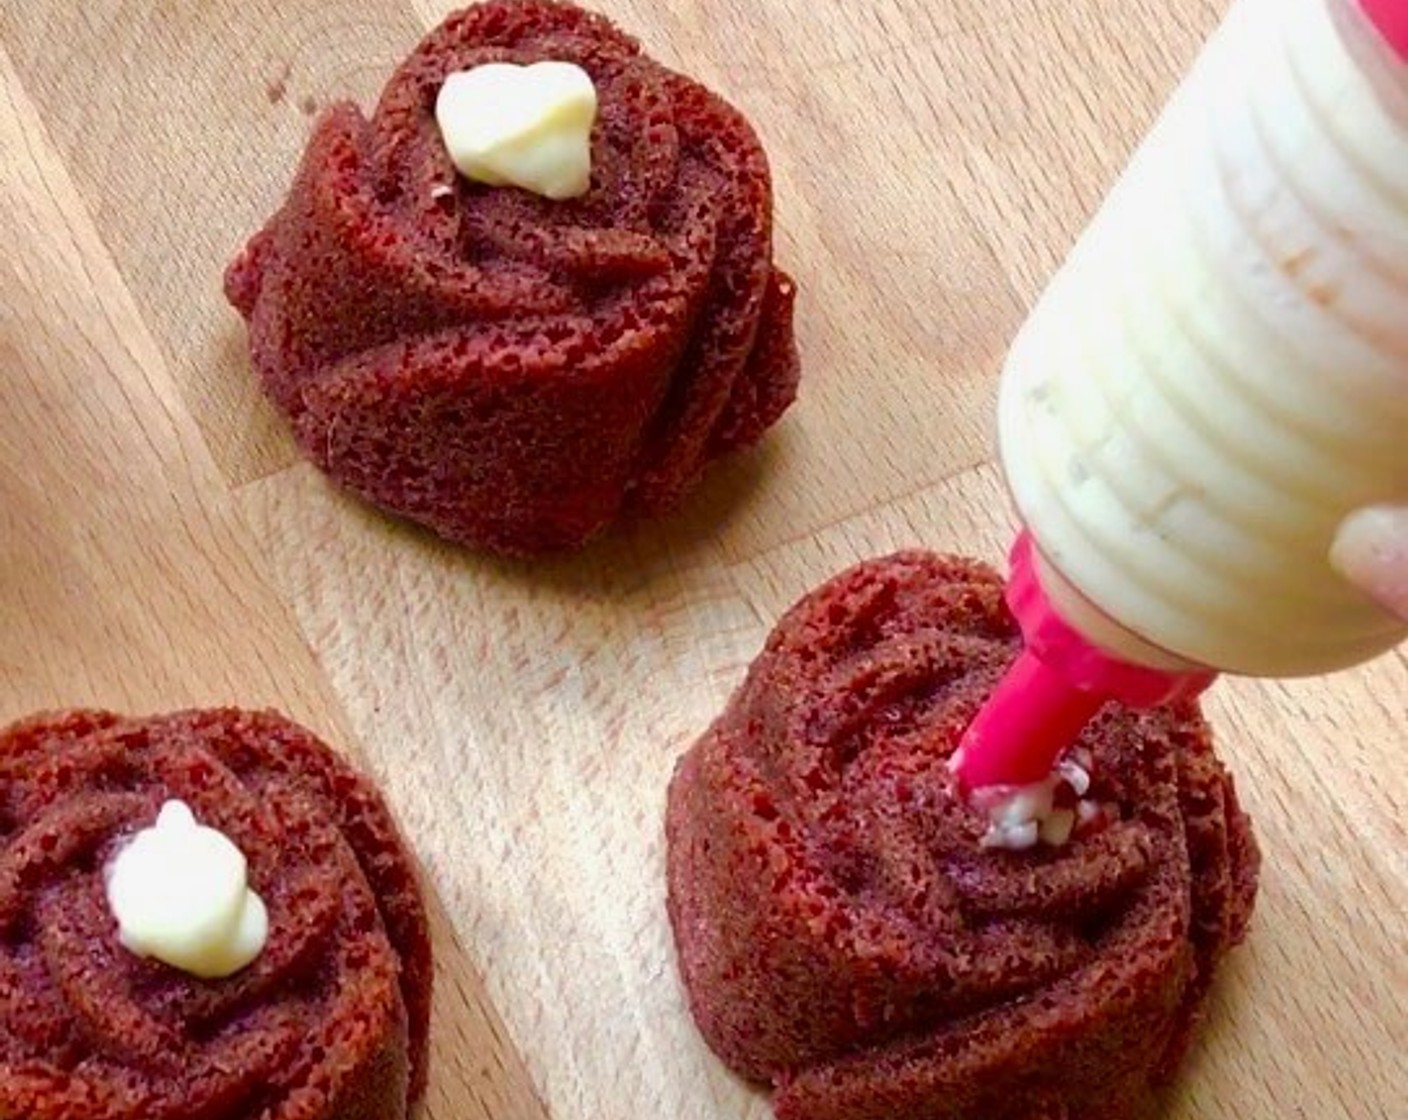 step 18 Fill the cream in a piping bag and pipe into the red velvet cupcakes. And we're done!